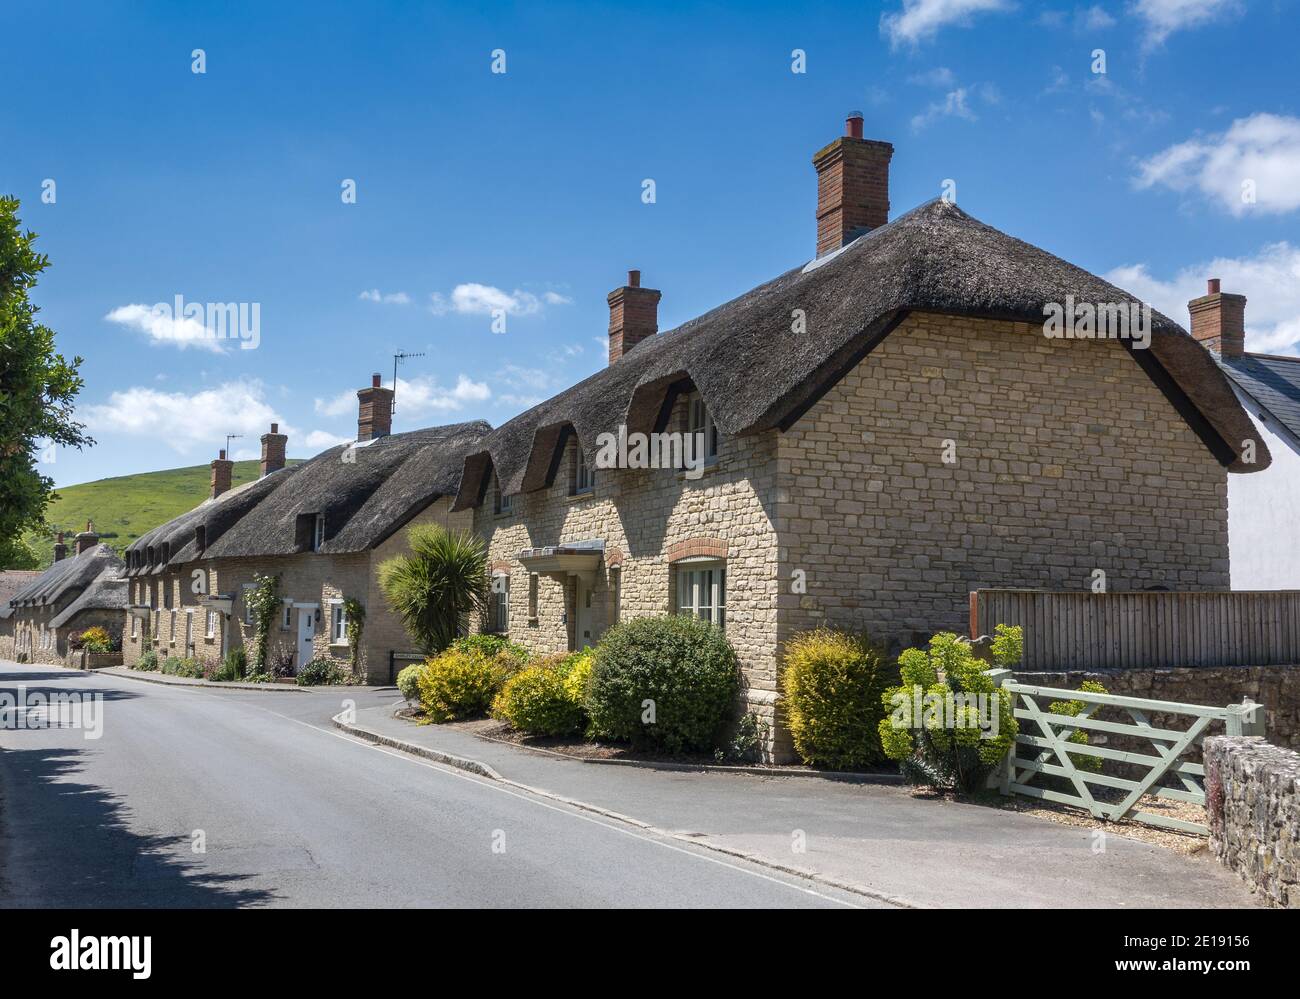 Row of beautiful traditional thatched houses on the Main Road in West Lulworth in Dorset, England, UK Stock Photo